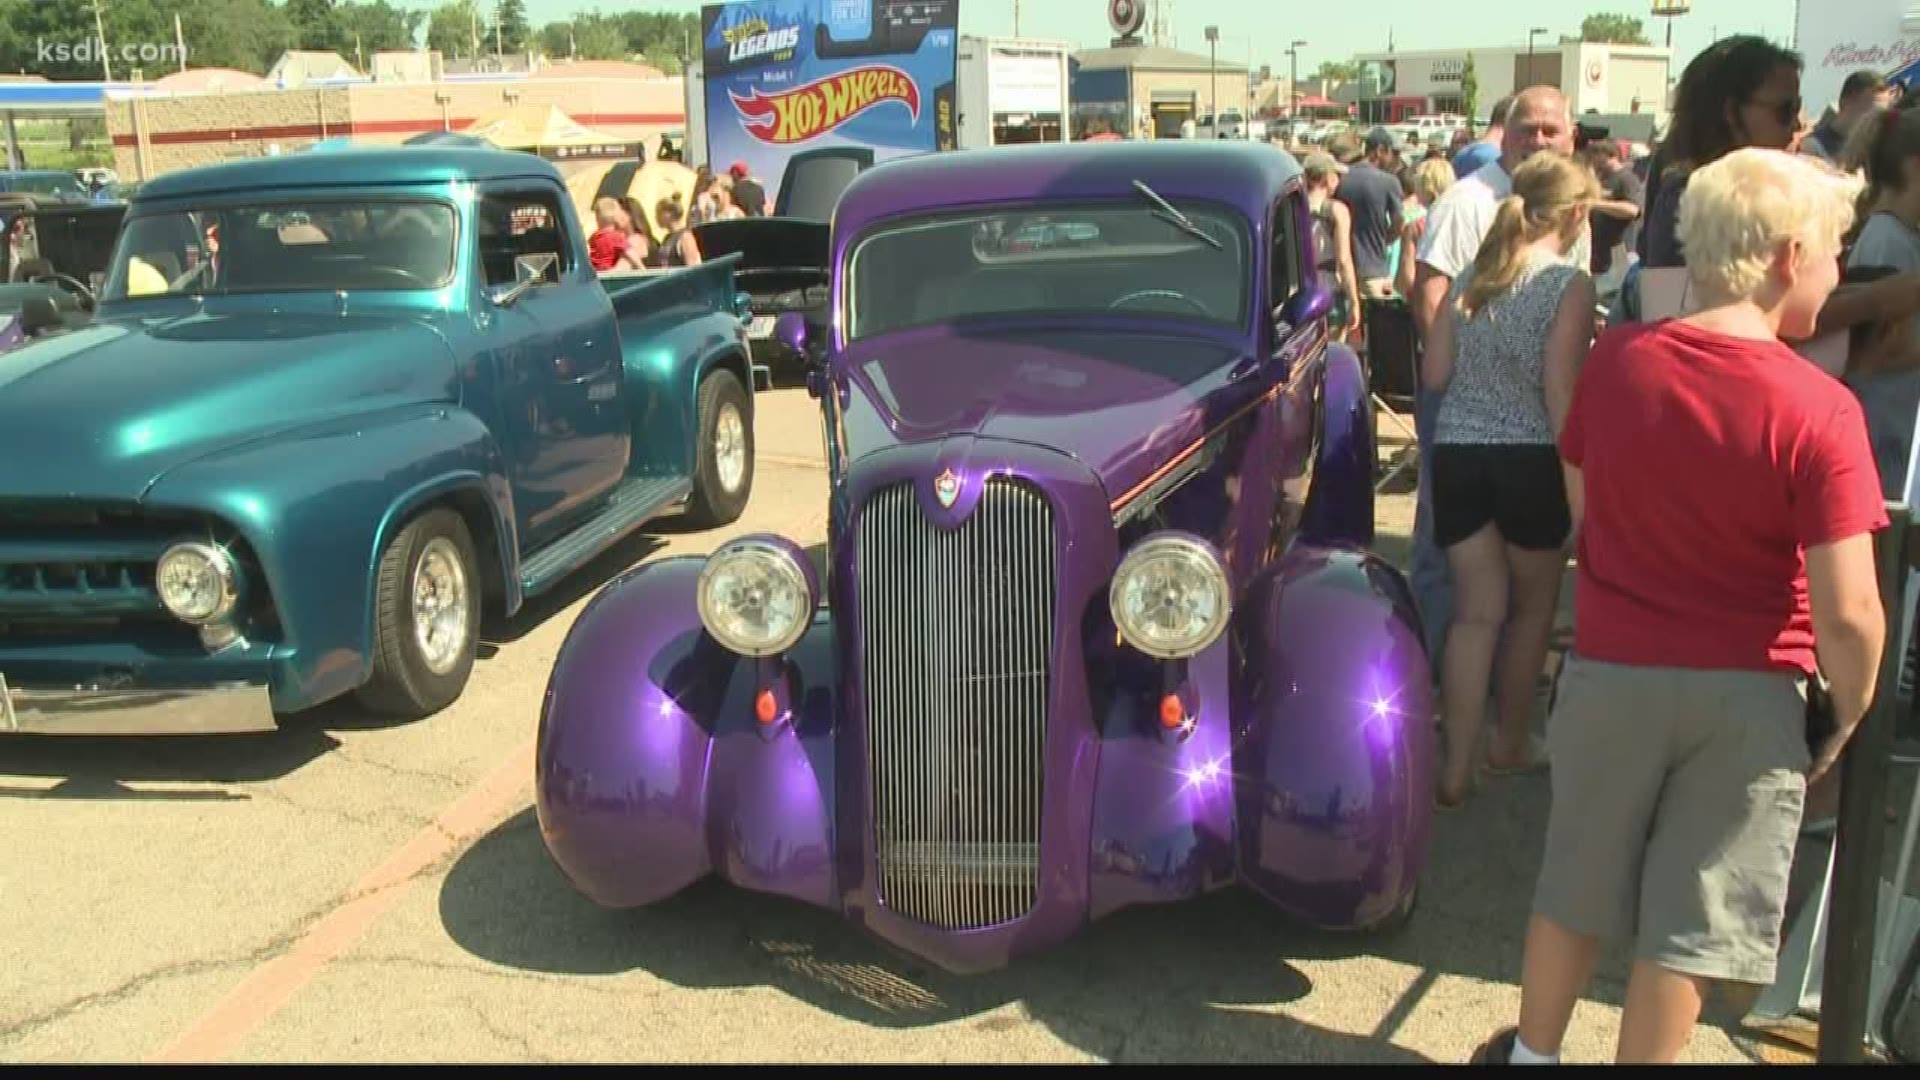 The Hot Wheels Legends Tour rolled into Festus Saturday, giving St. Louis area car enthusiasts a chance to not only display their car, but to have their car immortalized into a Hot Wheels Die-Cast.